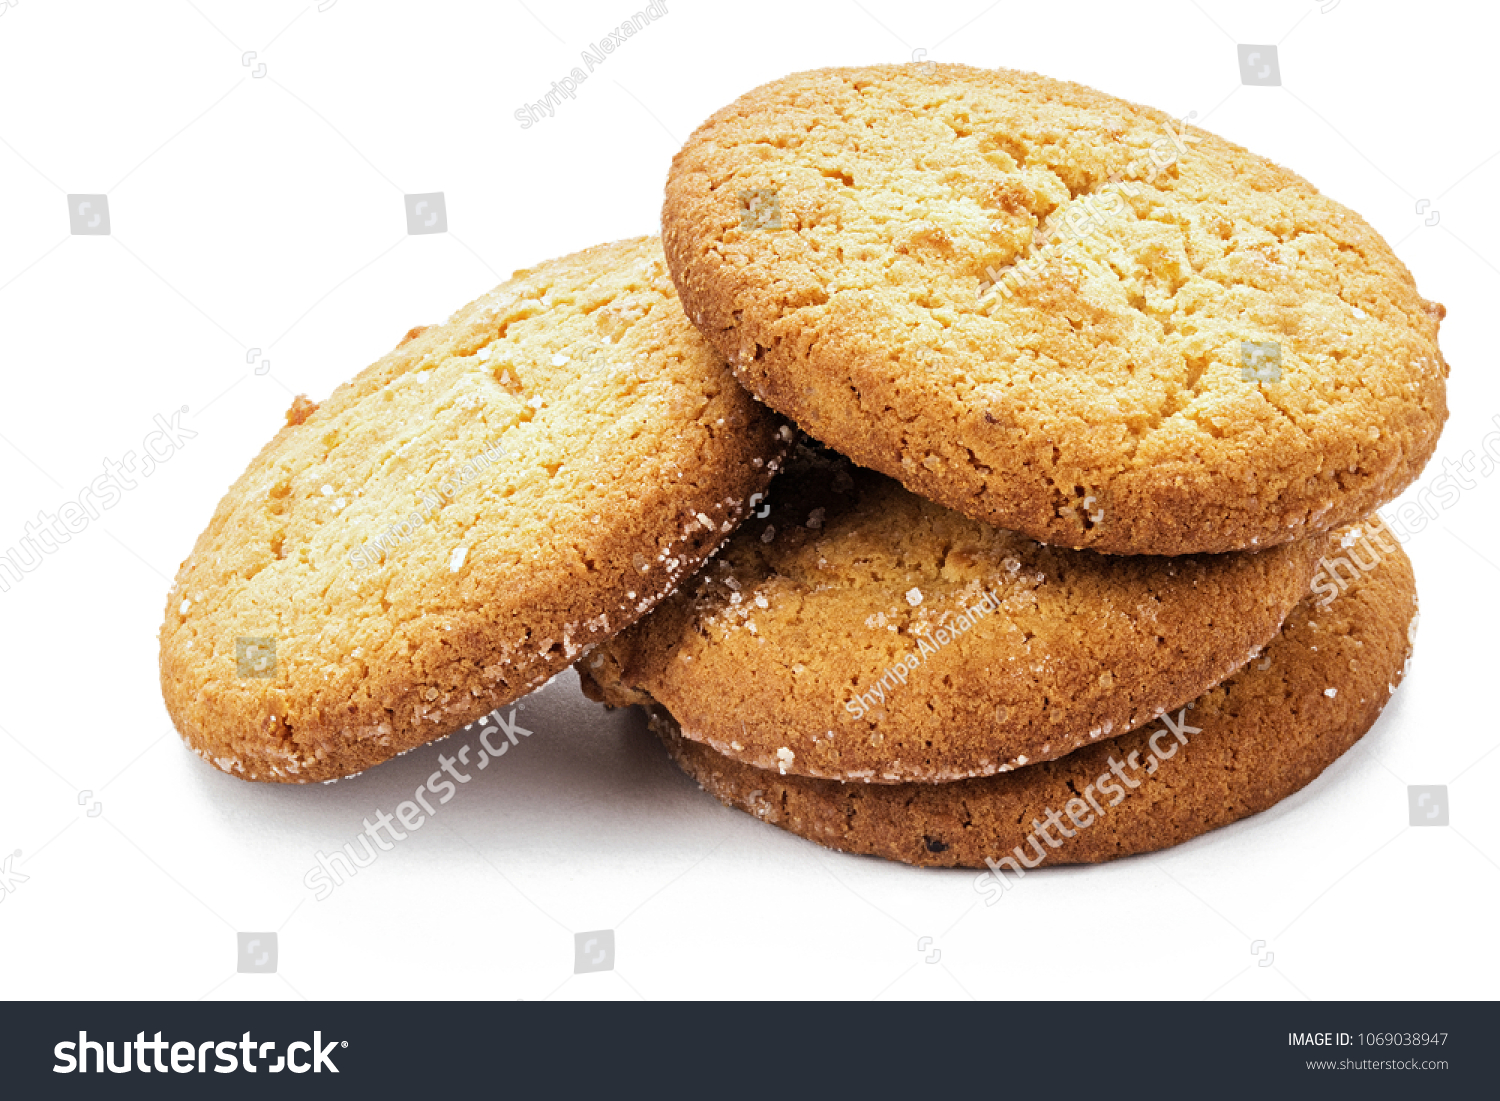 homemade shortbread cookie on white background, isolated, place for text
 #1069038947